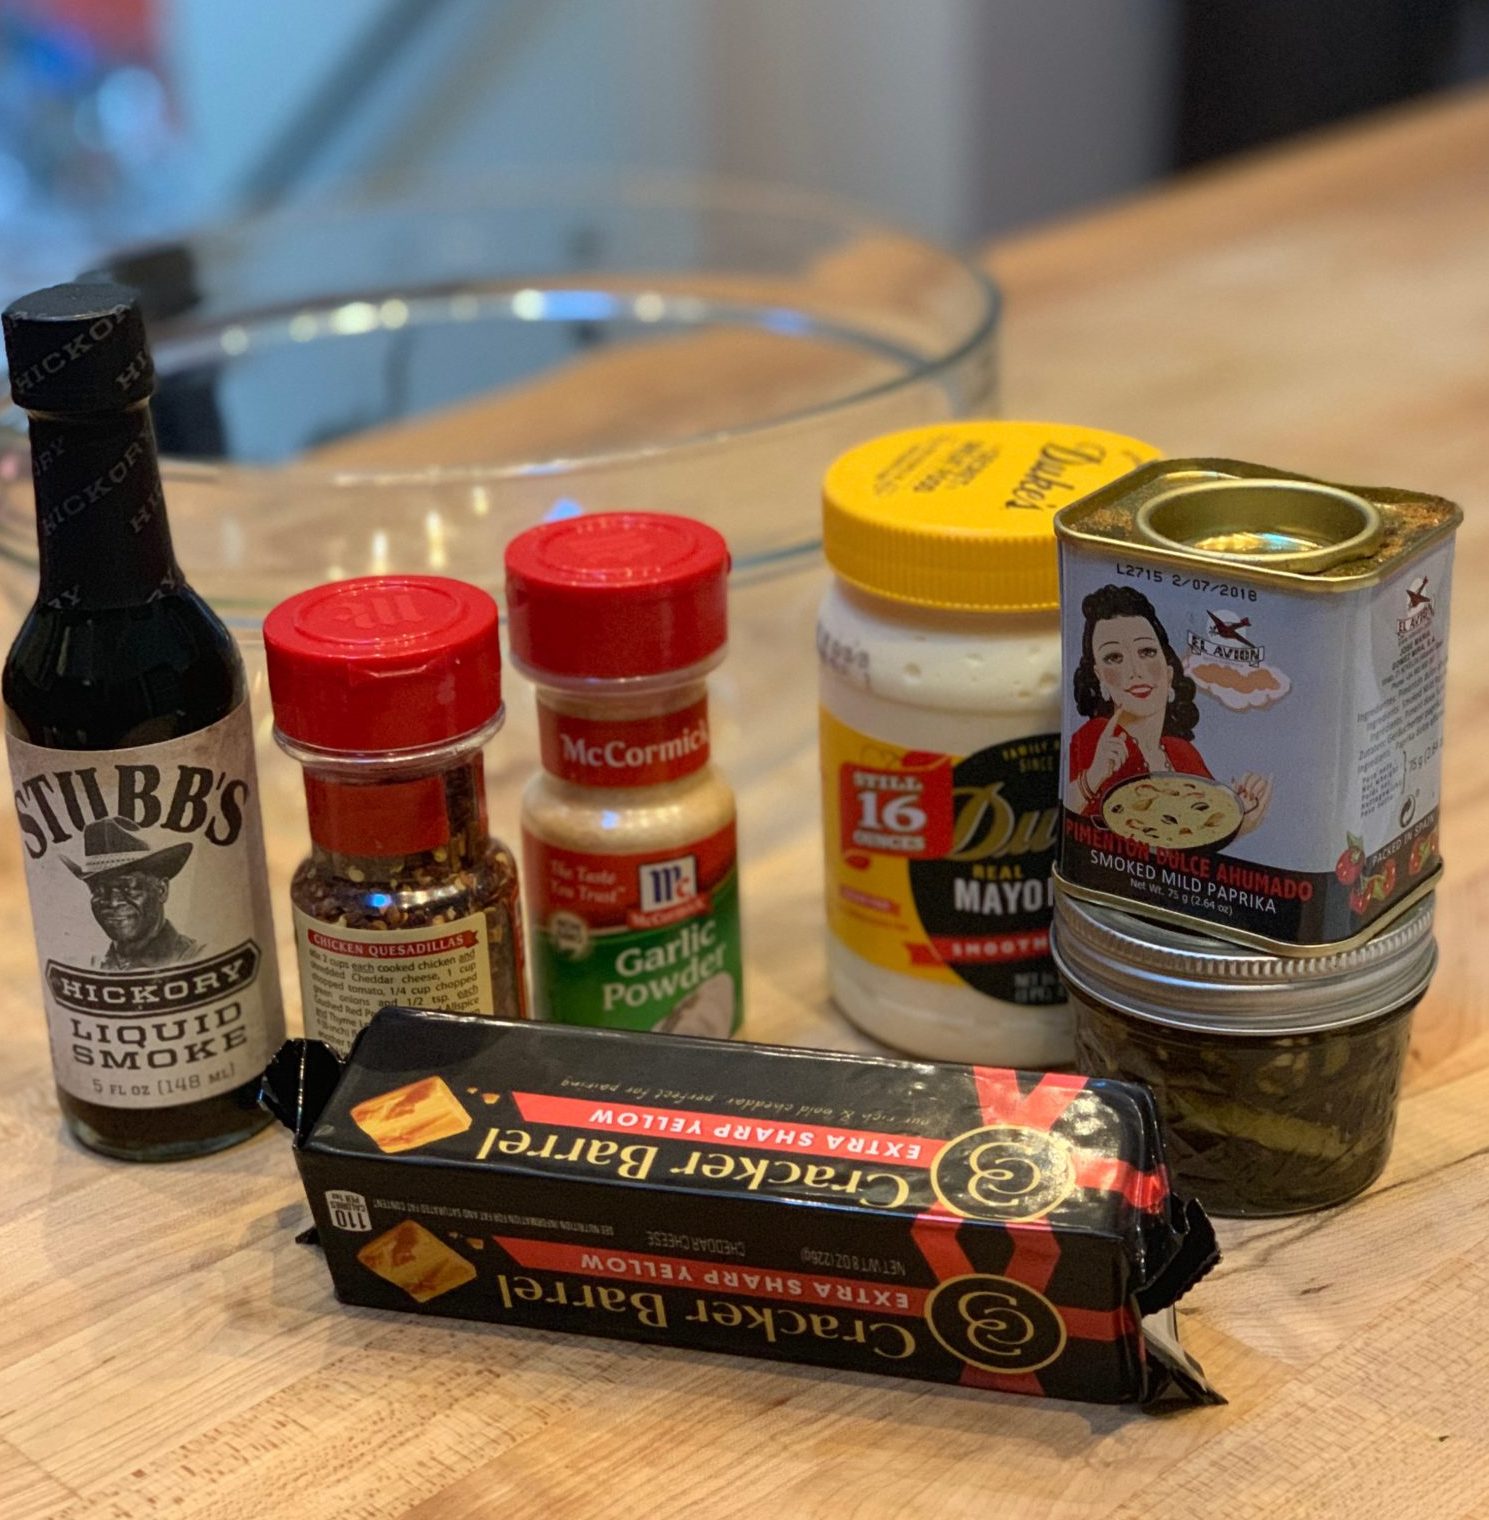 Showing the ingredients needed for Jalapeno Cheese